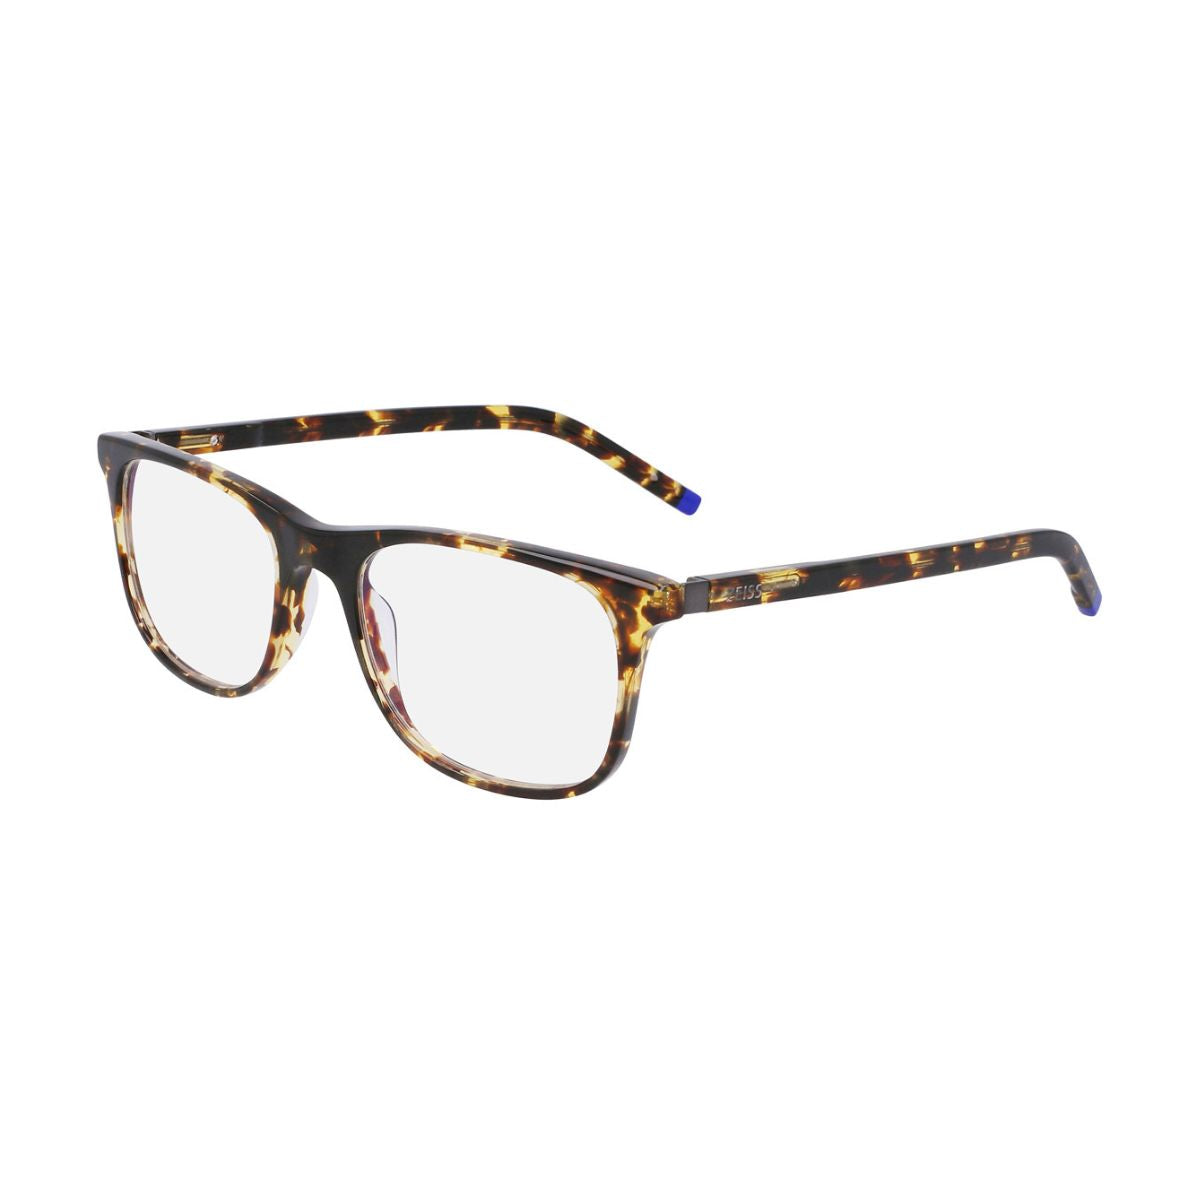 "shop Zeiss 22503 242 optical glasses frame for men's and women's online at optorium"